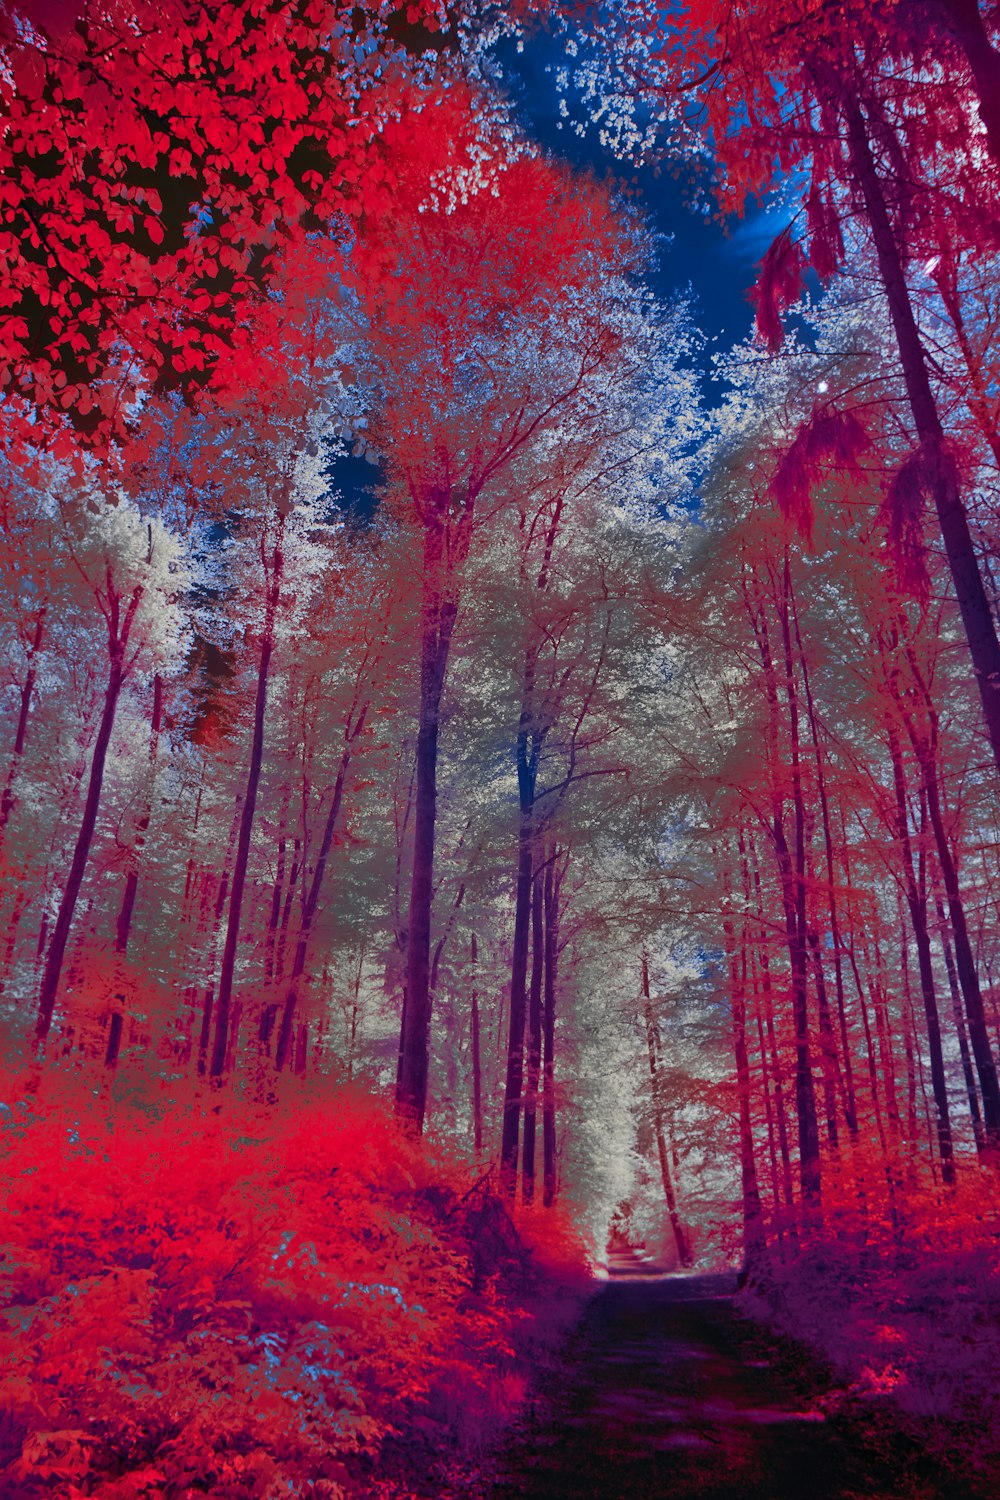 a red and blue infrared image of a path through a forest